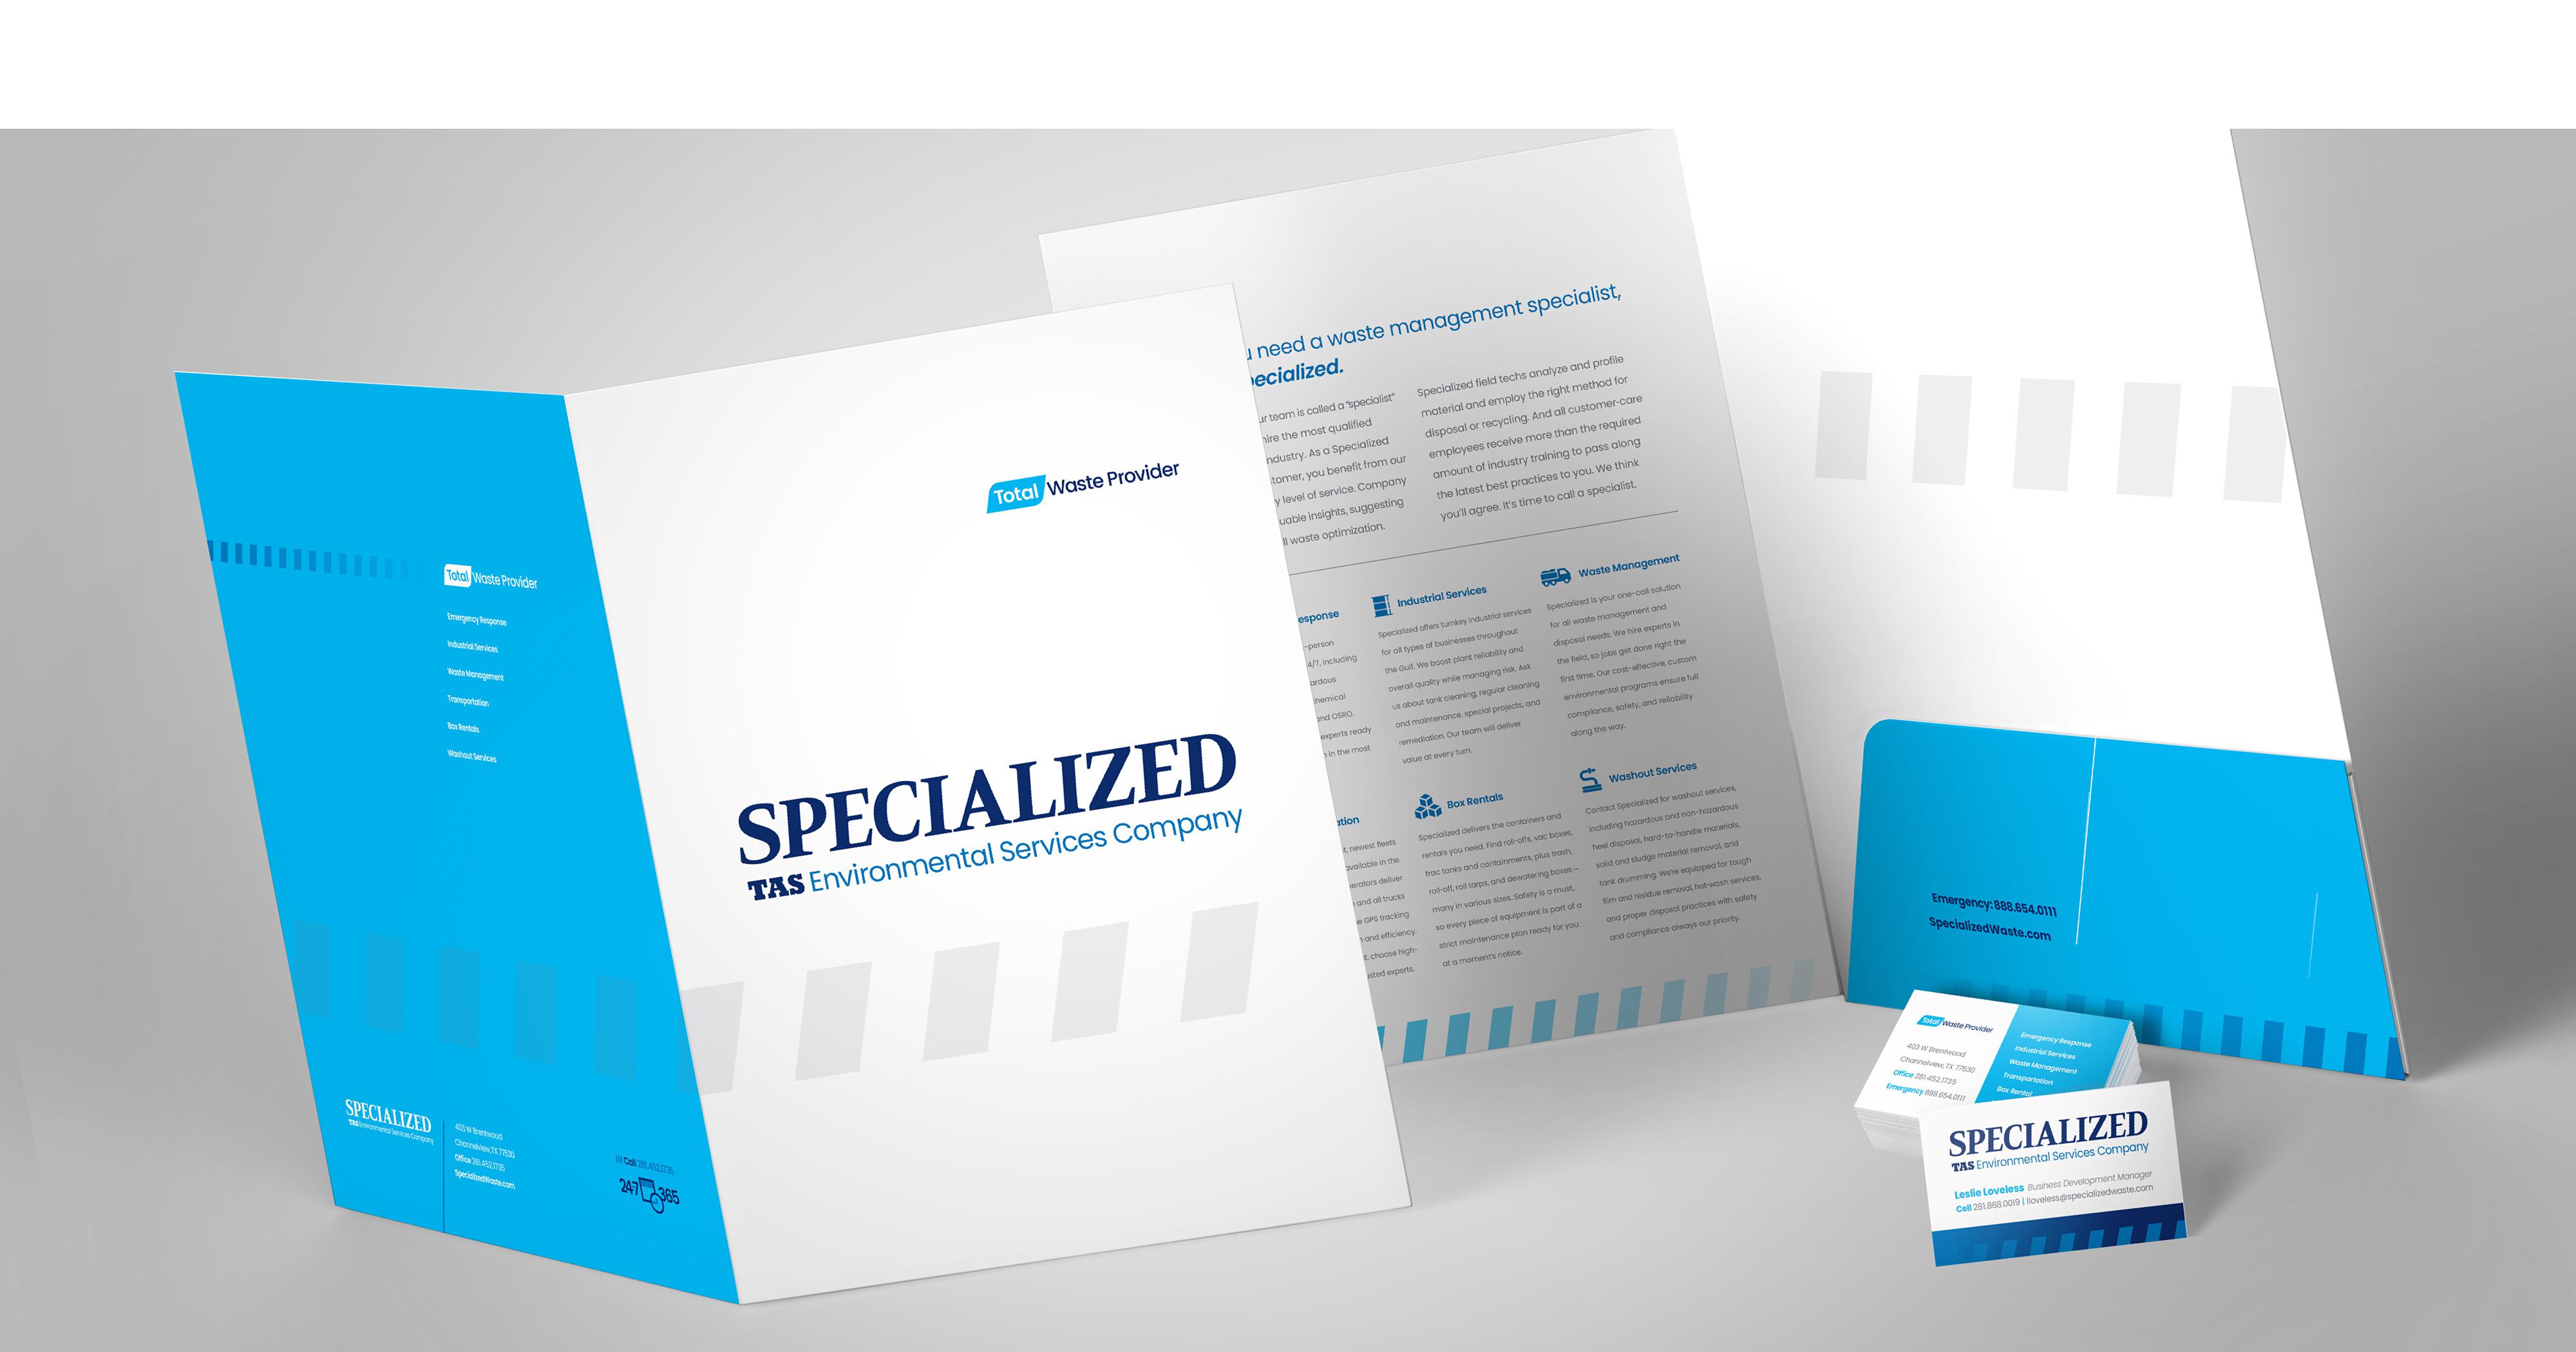 Specialized Waste Systems branded materials image